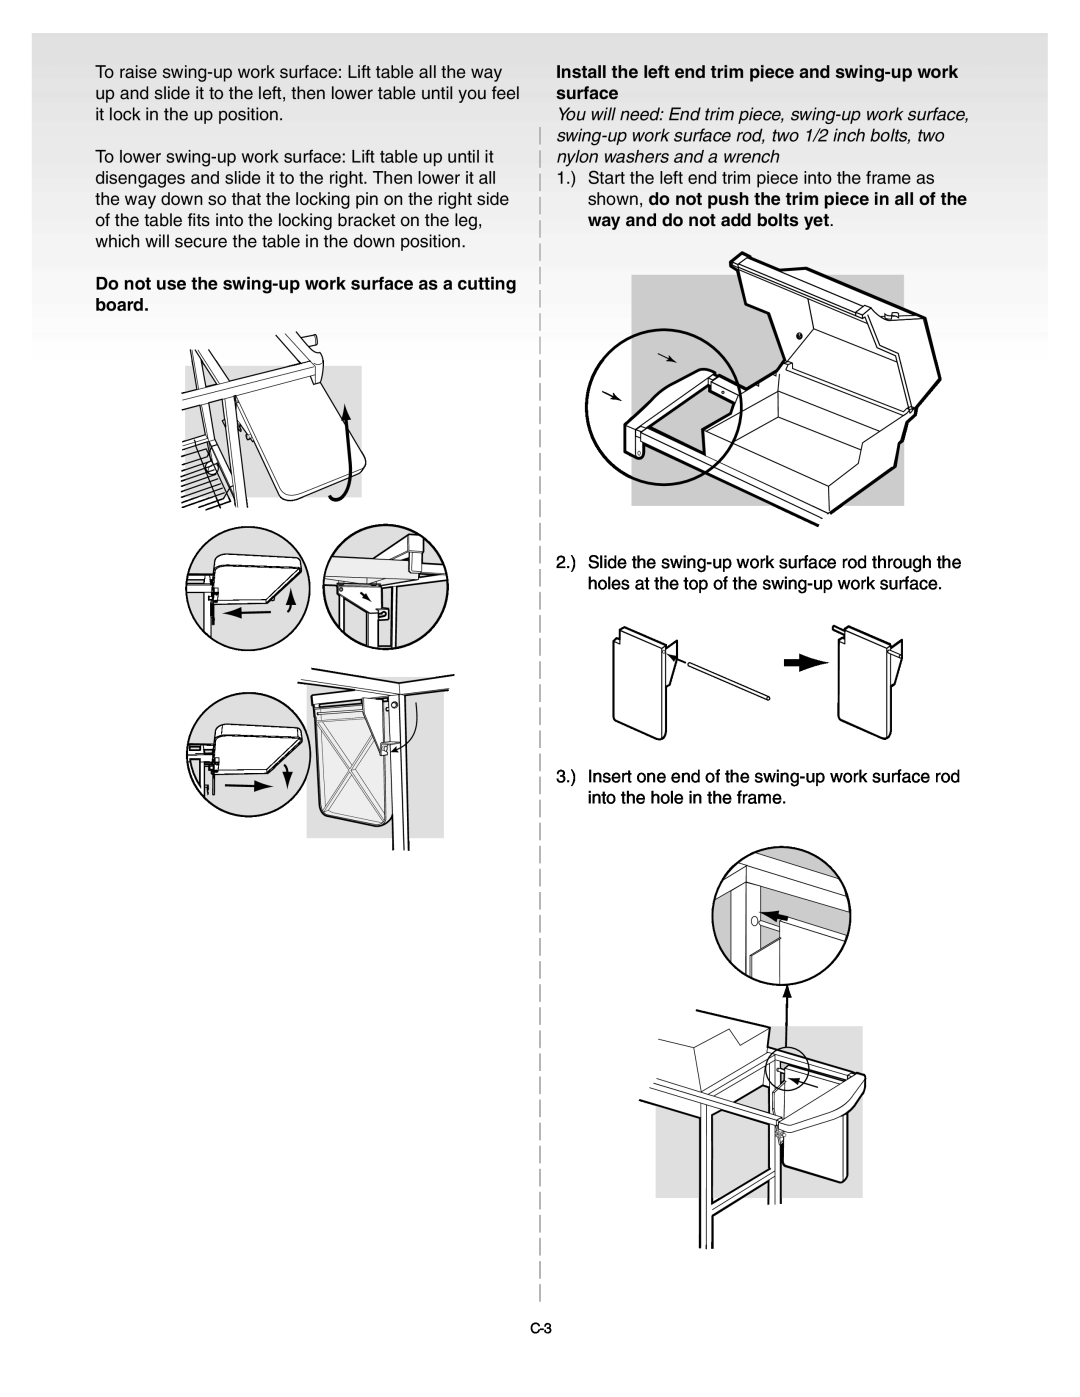 Weber C052.C, B067.E, A101.c manual Do not use the swing-up work surface as a cutting board 